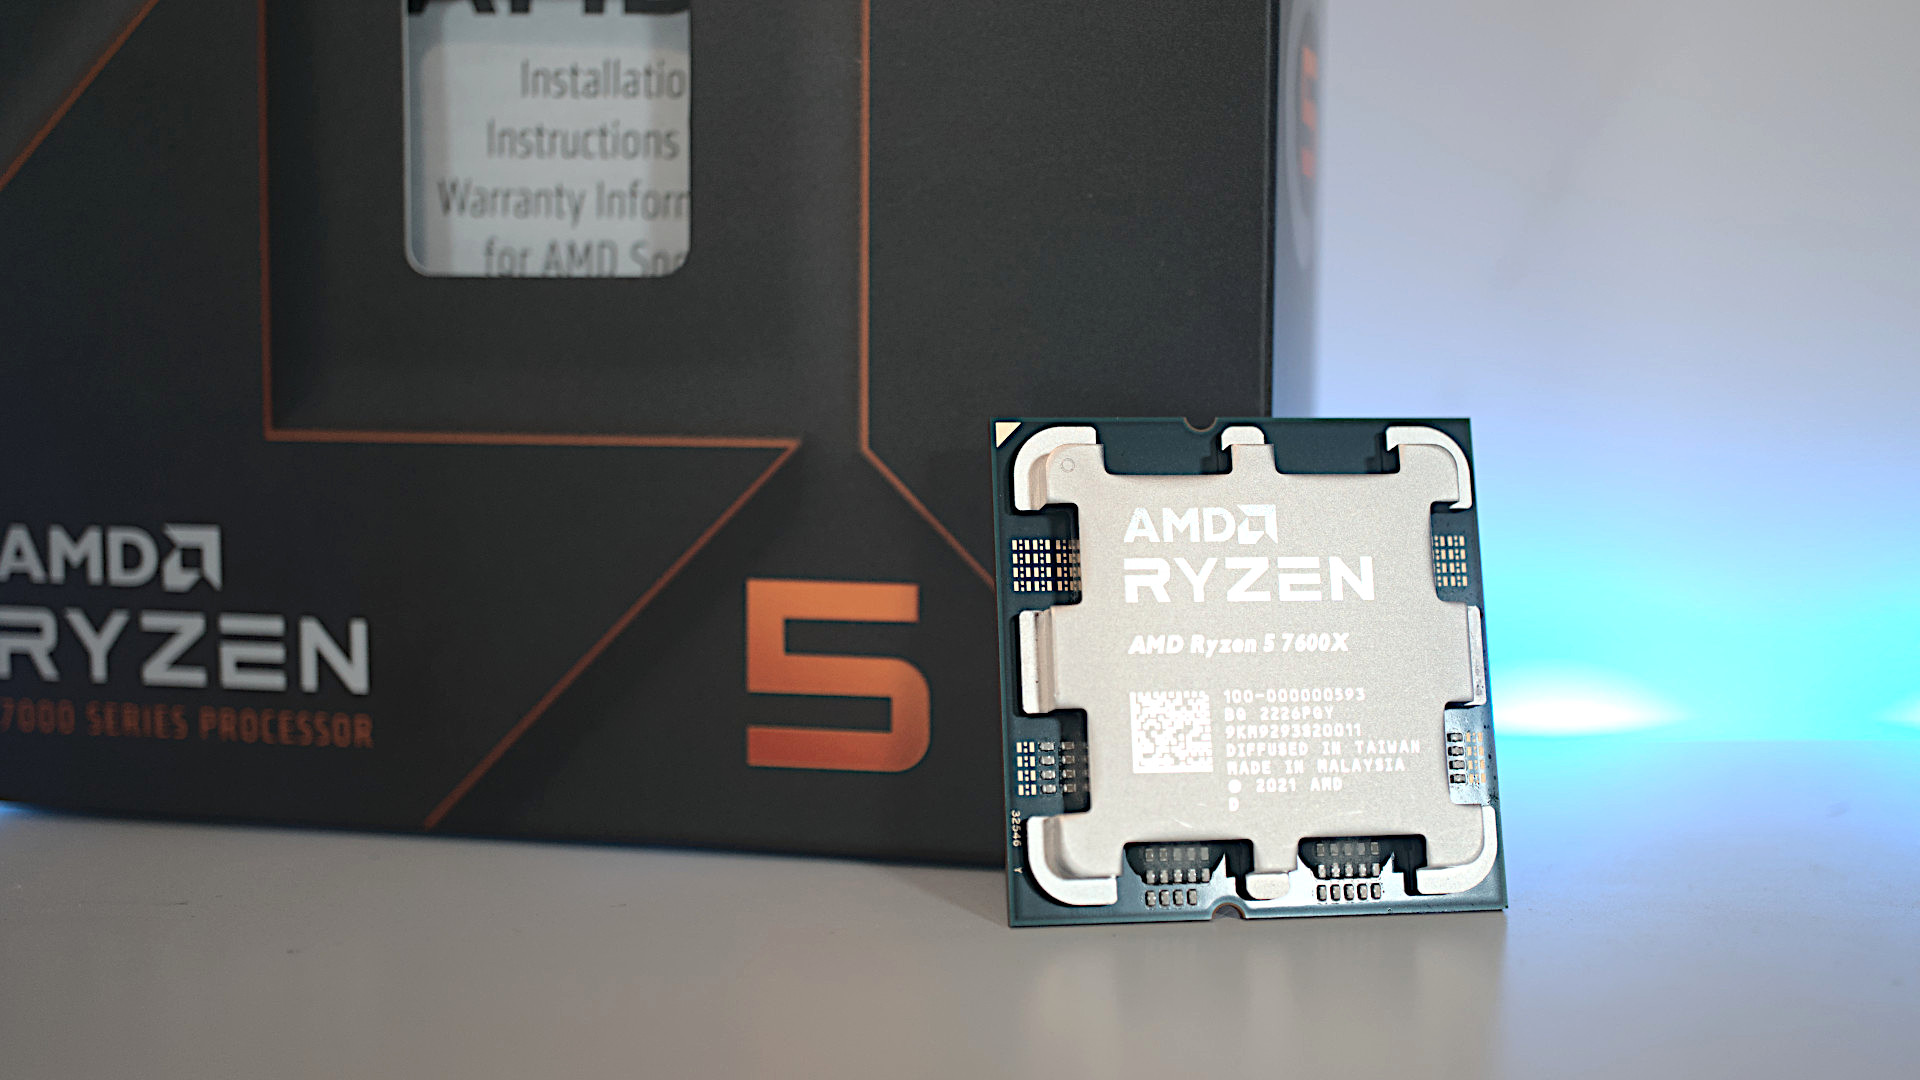 AMD Ryzen 5 7600X review: This entry-level AMD CPU is a 6-core beast